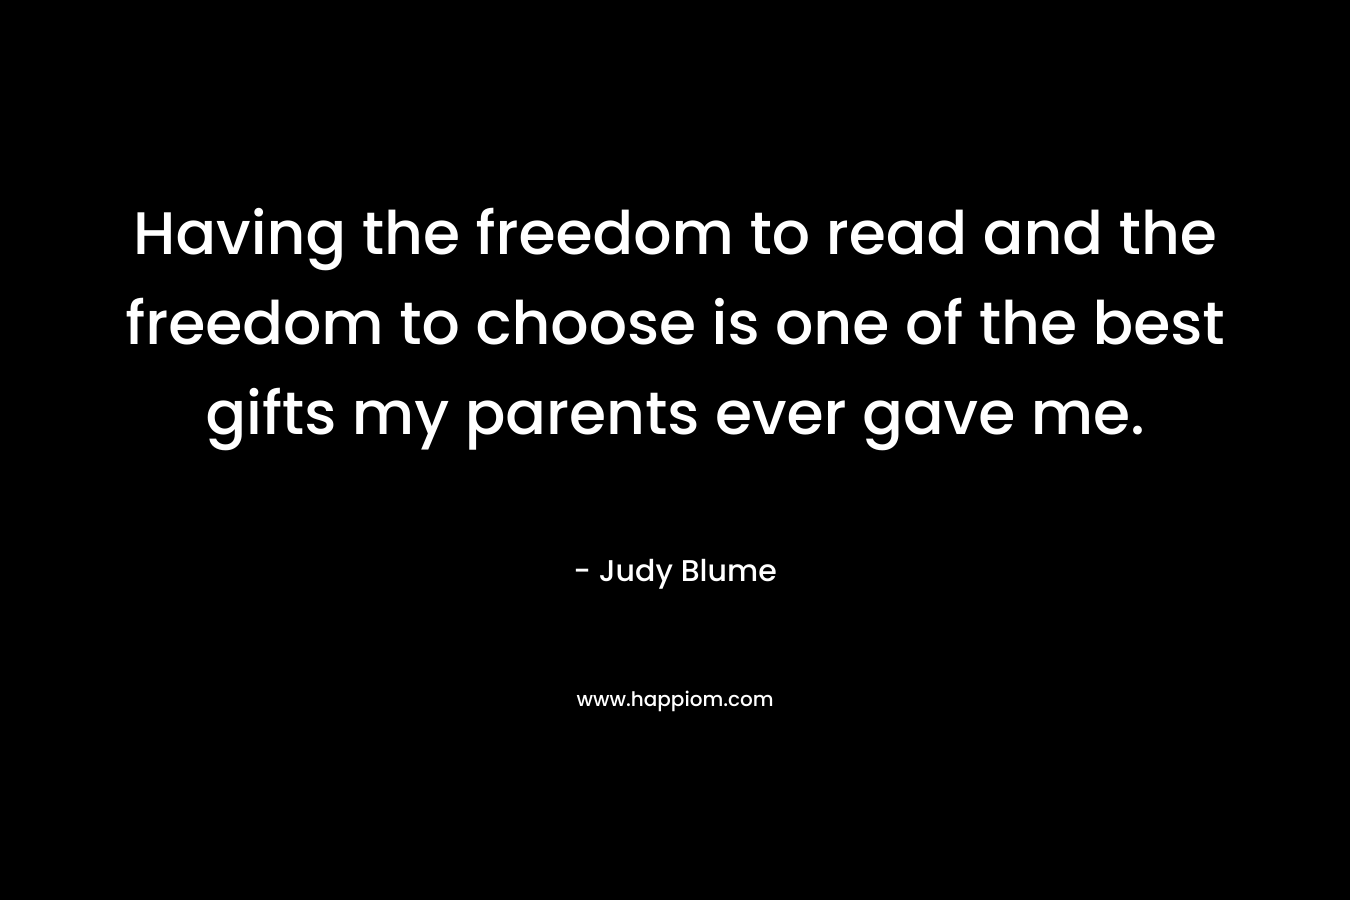 Having the freedom to read and the freedom to choose is one of the best gifts my parents ever gave me.